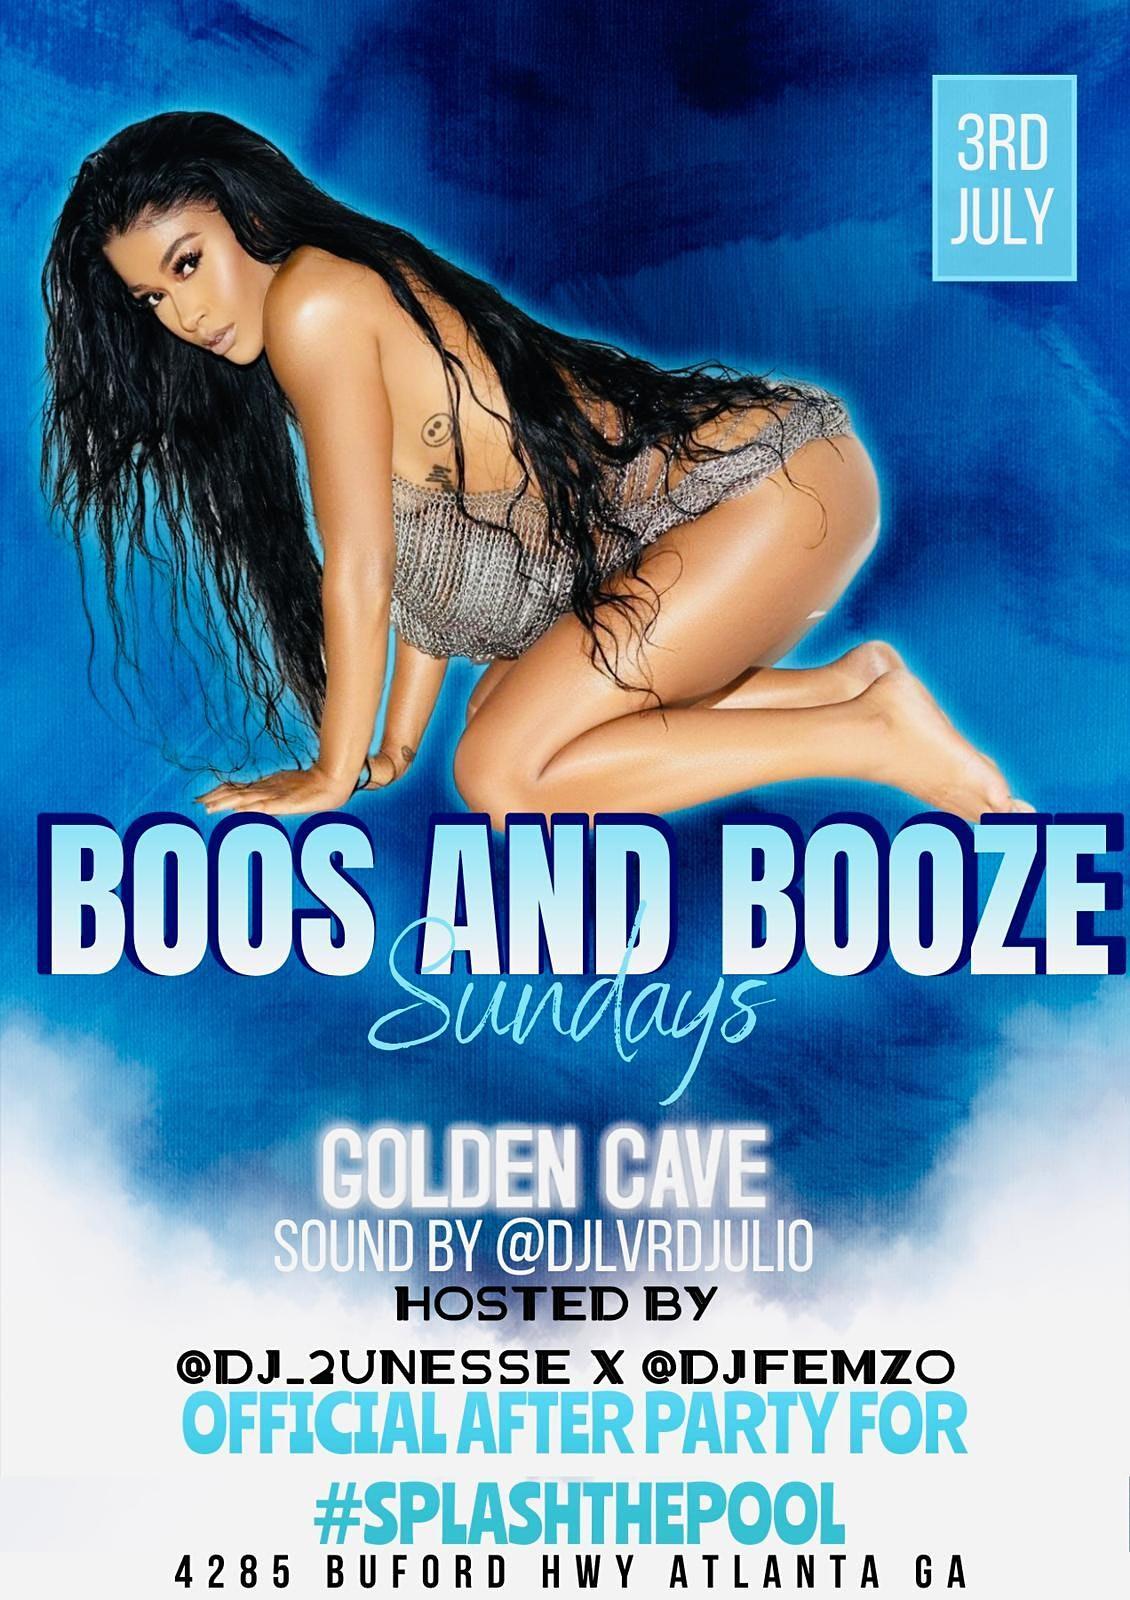 BOOS AND BOOZE SUNDAYS DAYPARTY AT GOLDENCAVEATL | FREE ENTRY FREE MIMOSAS
Sun Oct 30, 6:00 PM - Mon Oct 31, 12:30 AM
in 15 days